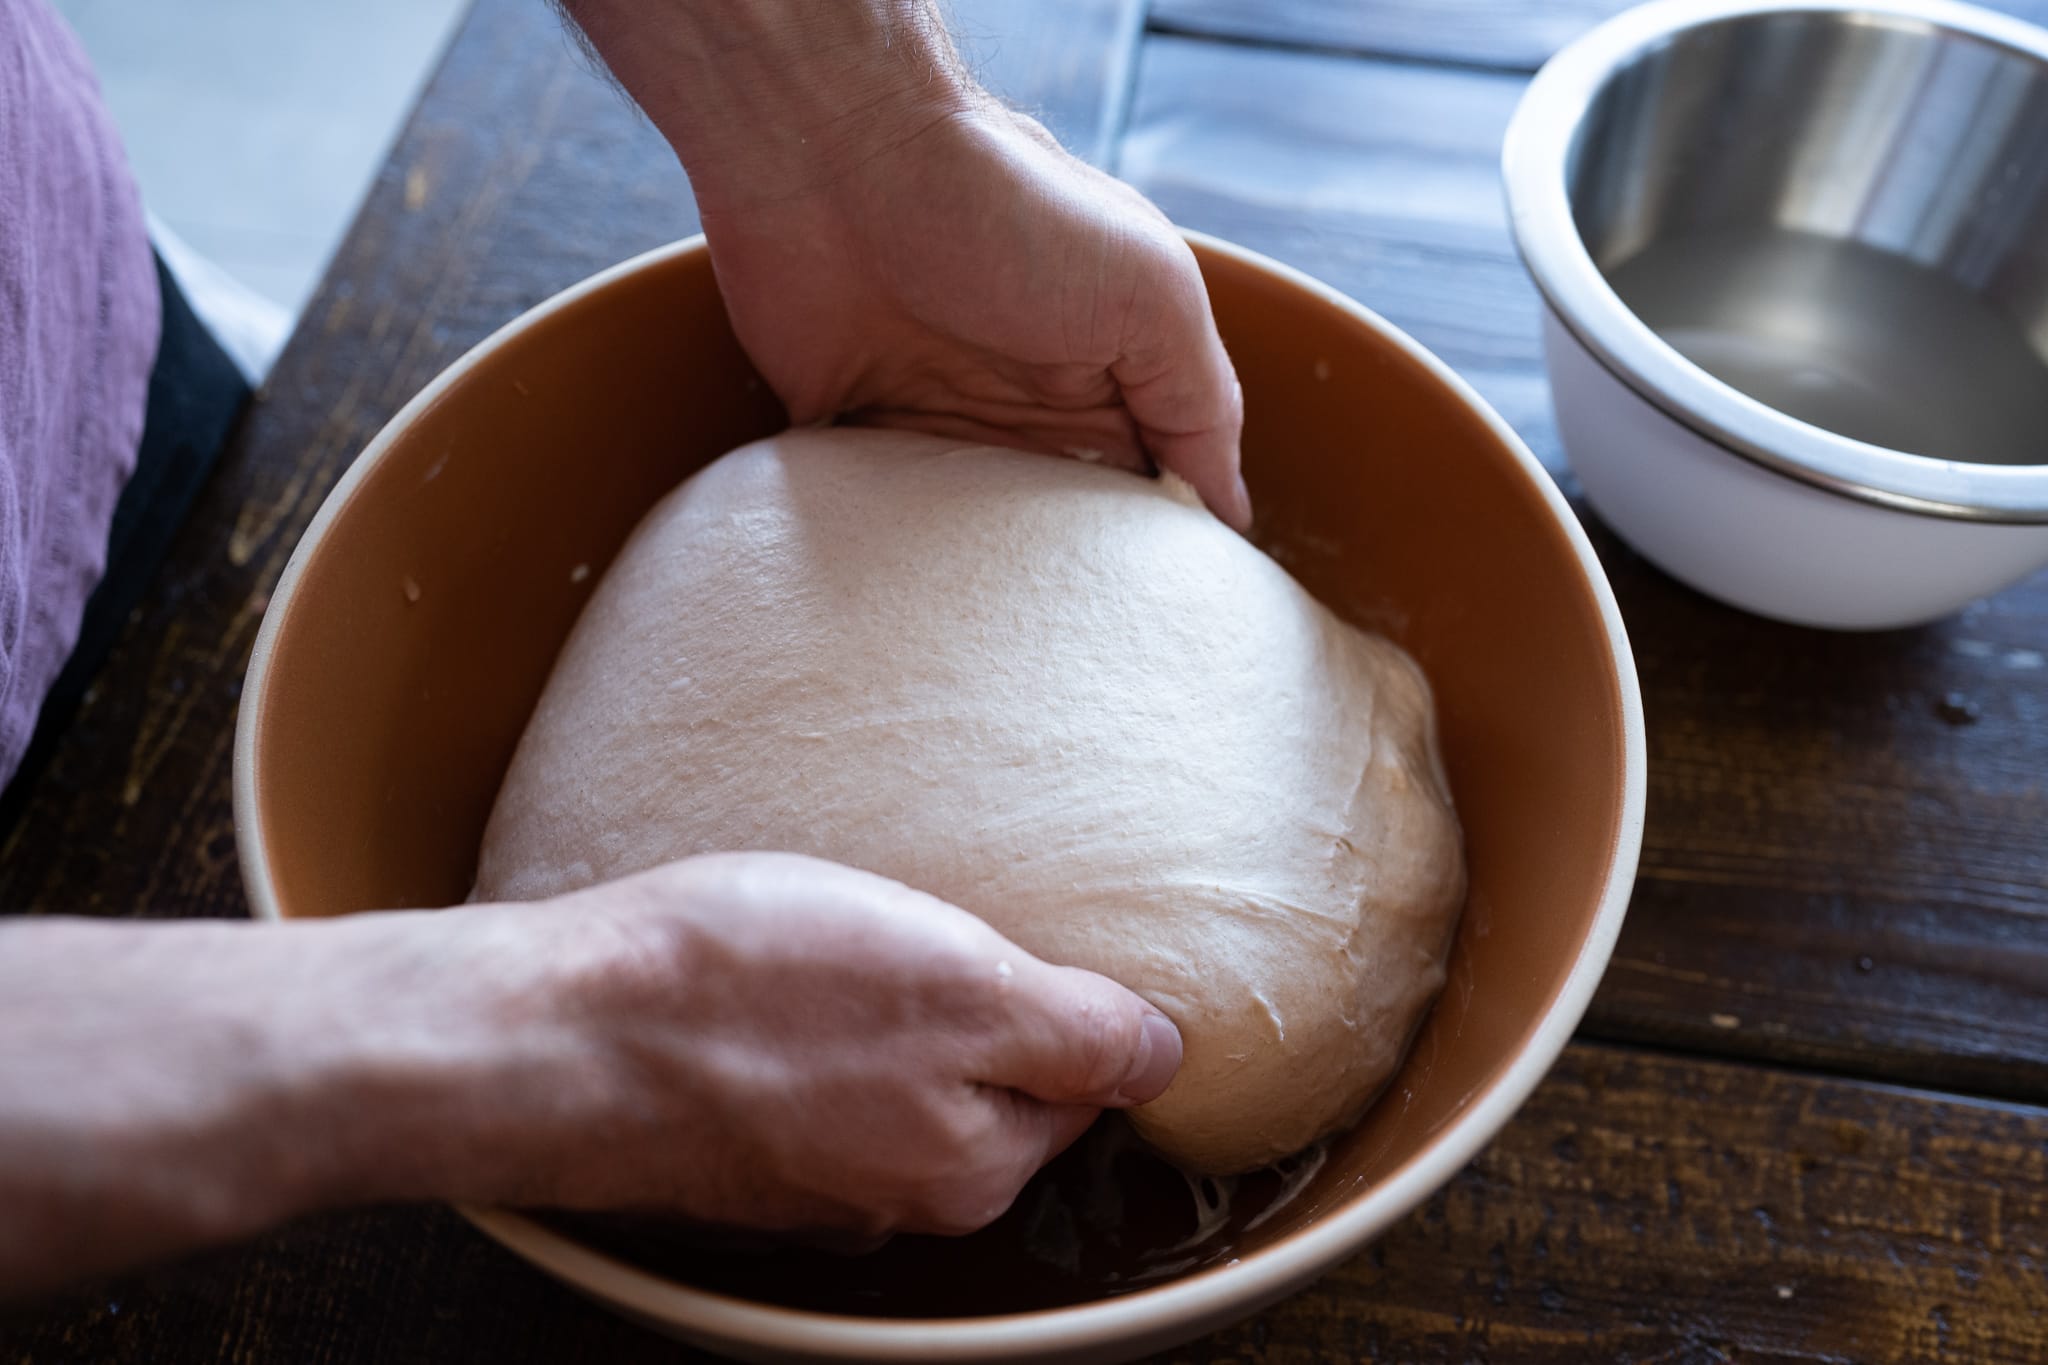 This baking gadget takes the mess out of bread making! Knead away with